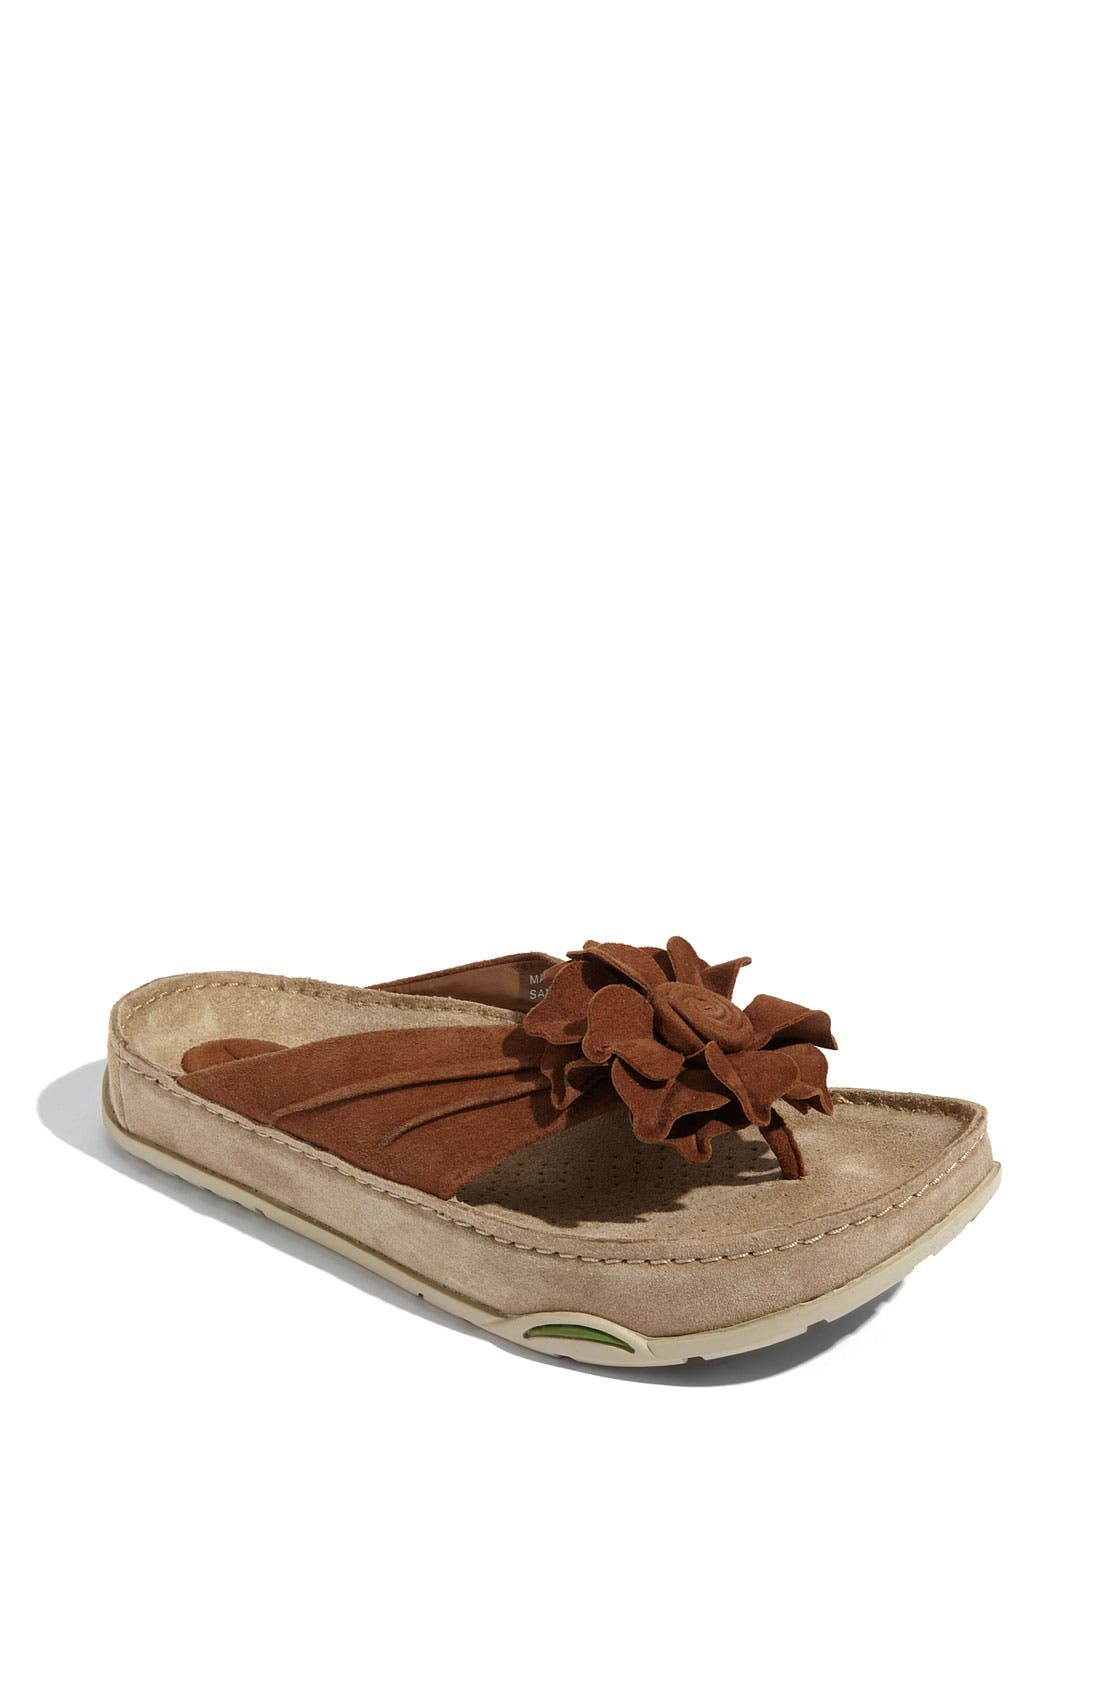 nordstrom earth shoes